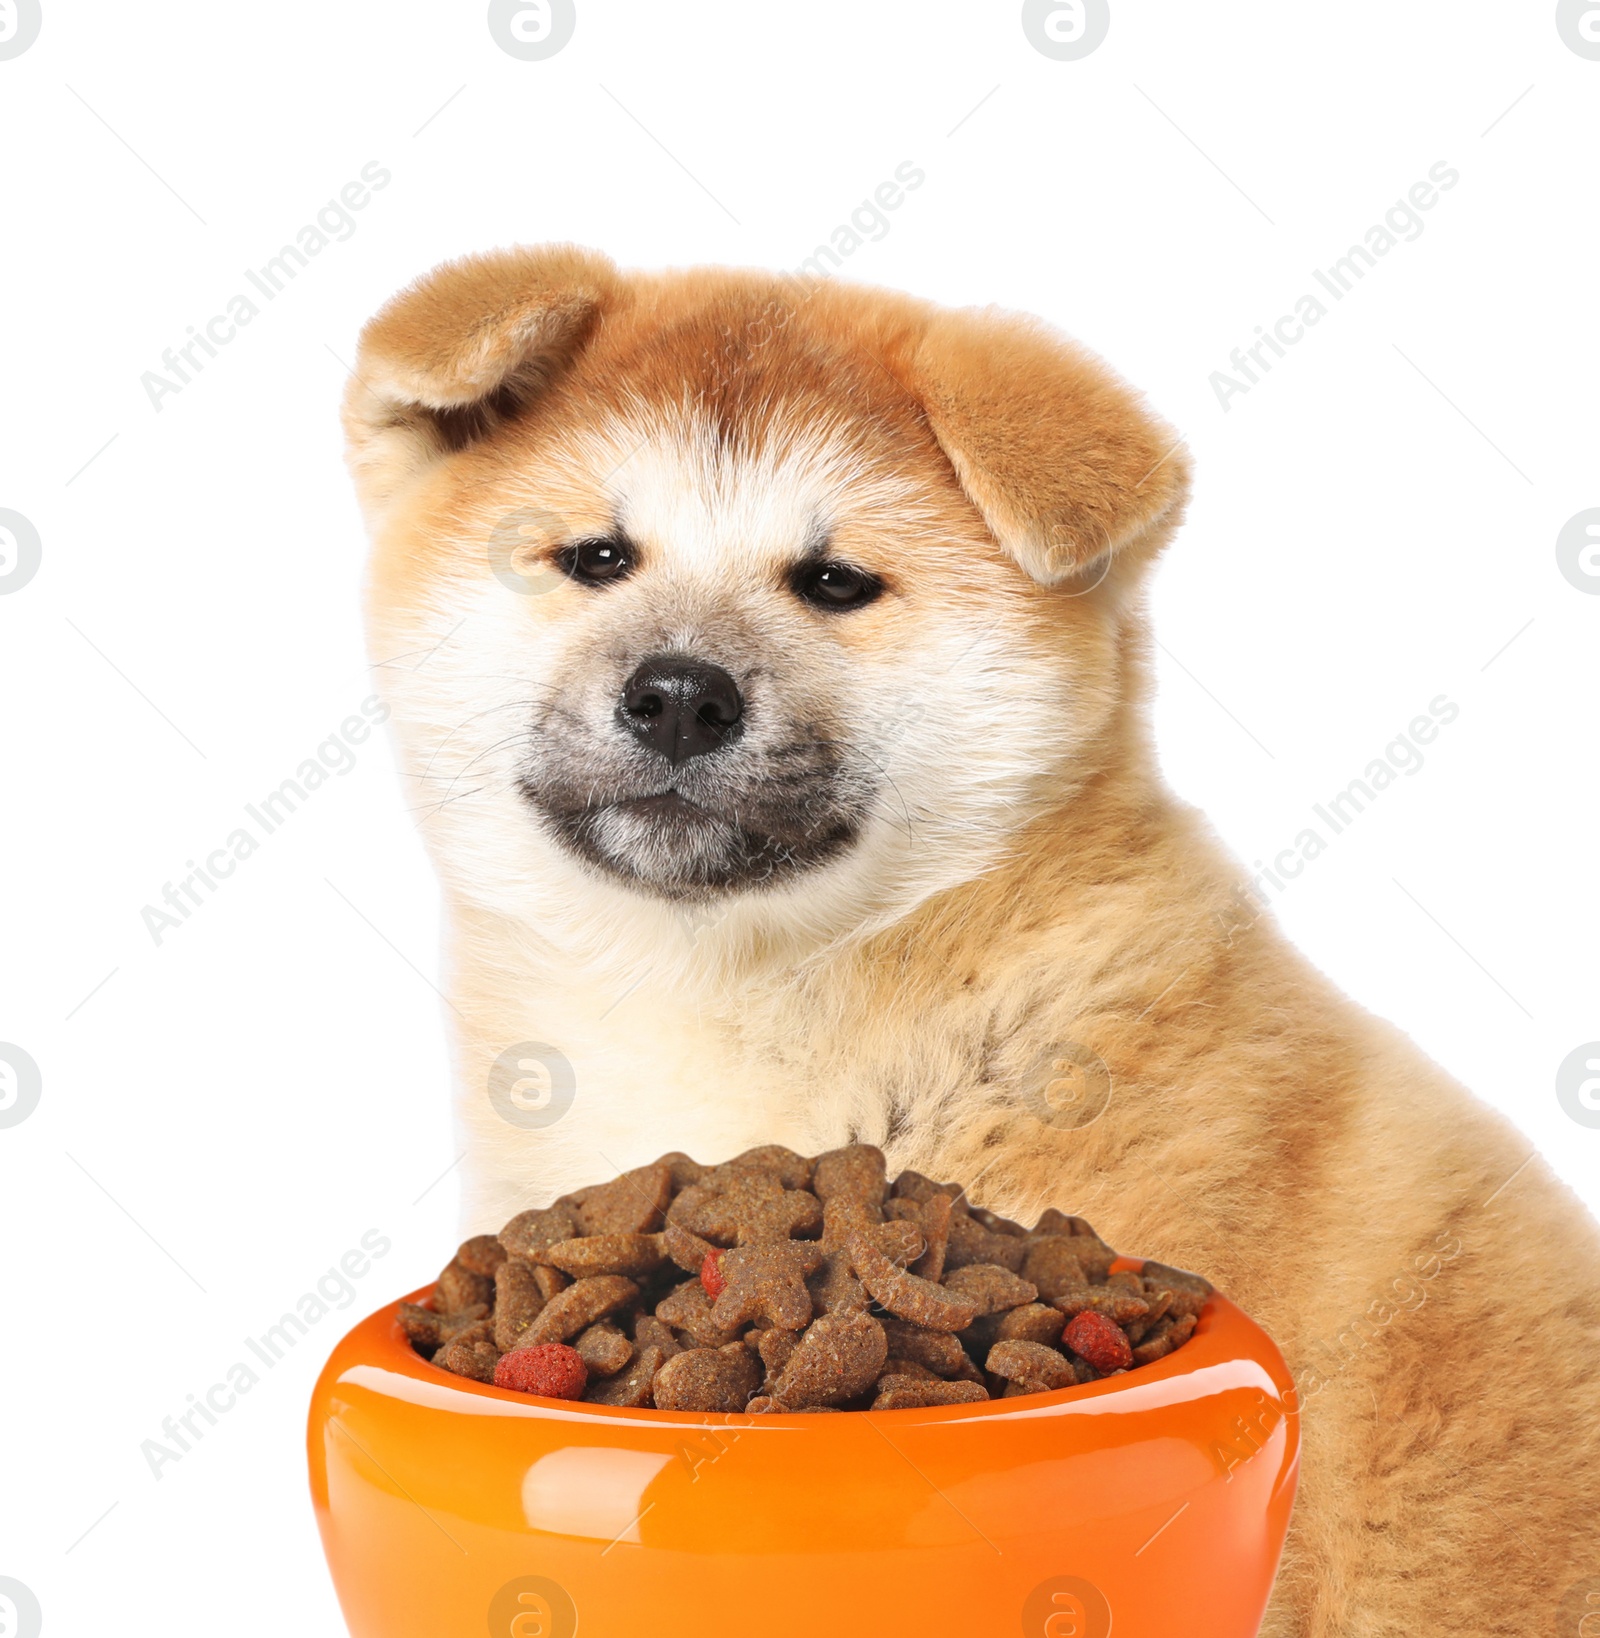 Image of Cute Akita Inu puppy and feeding bowl with dog food on white background